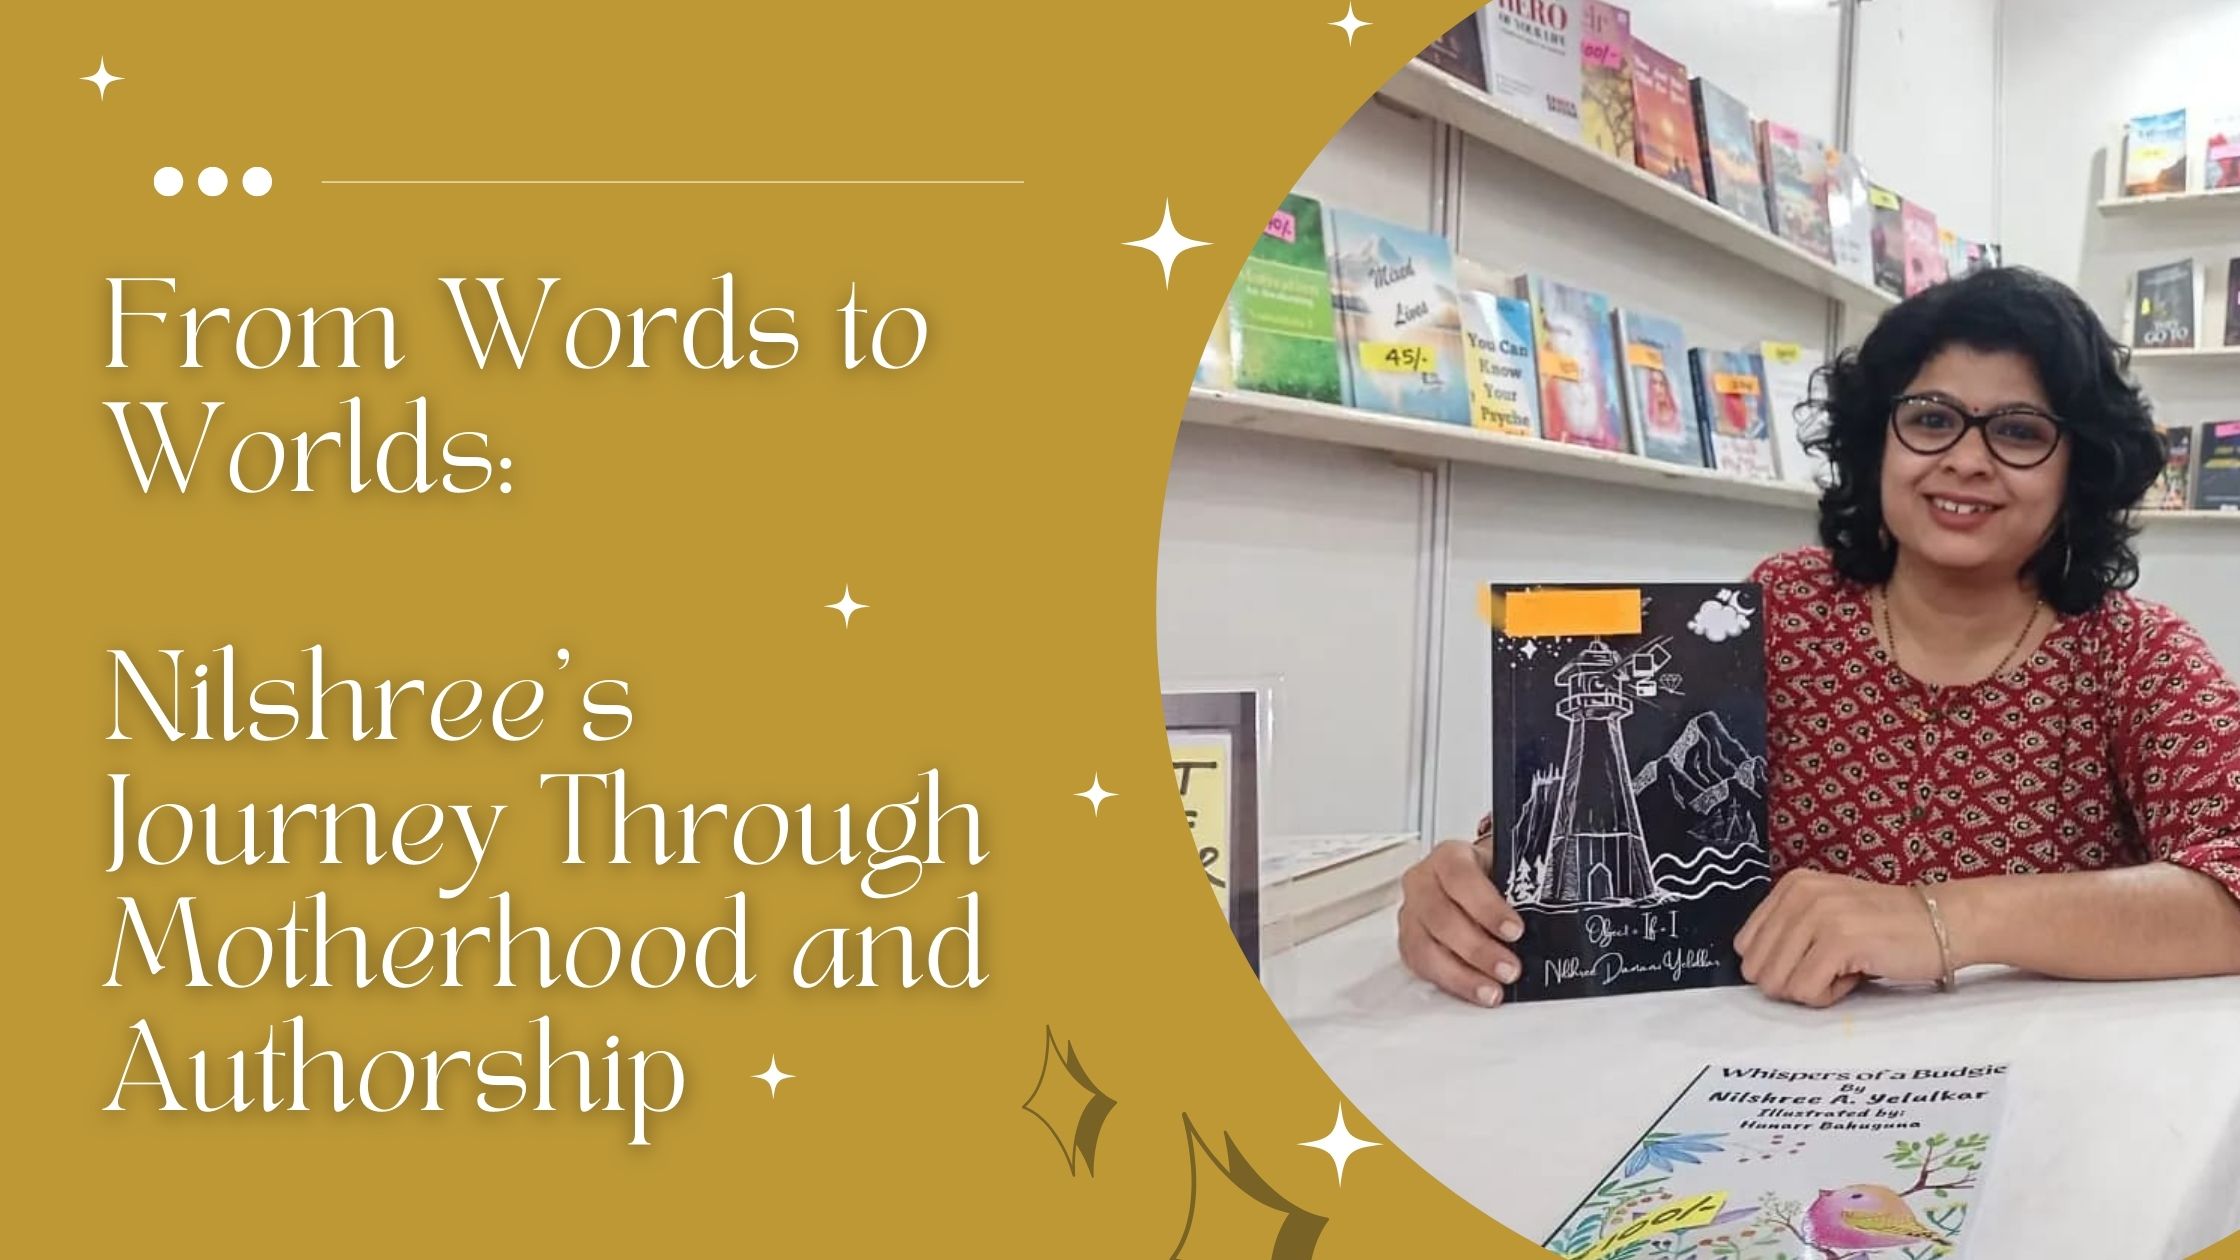 From Words to Worlds: Nilshree’s Journey Through Motherhood and Authorship